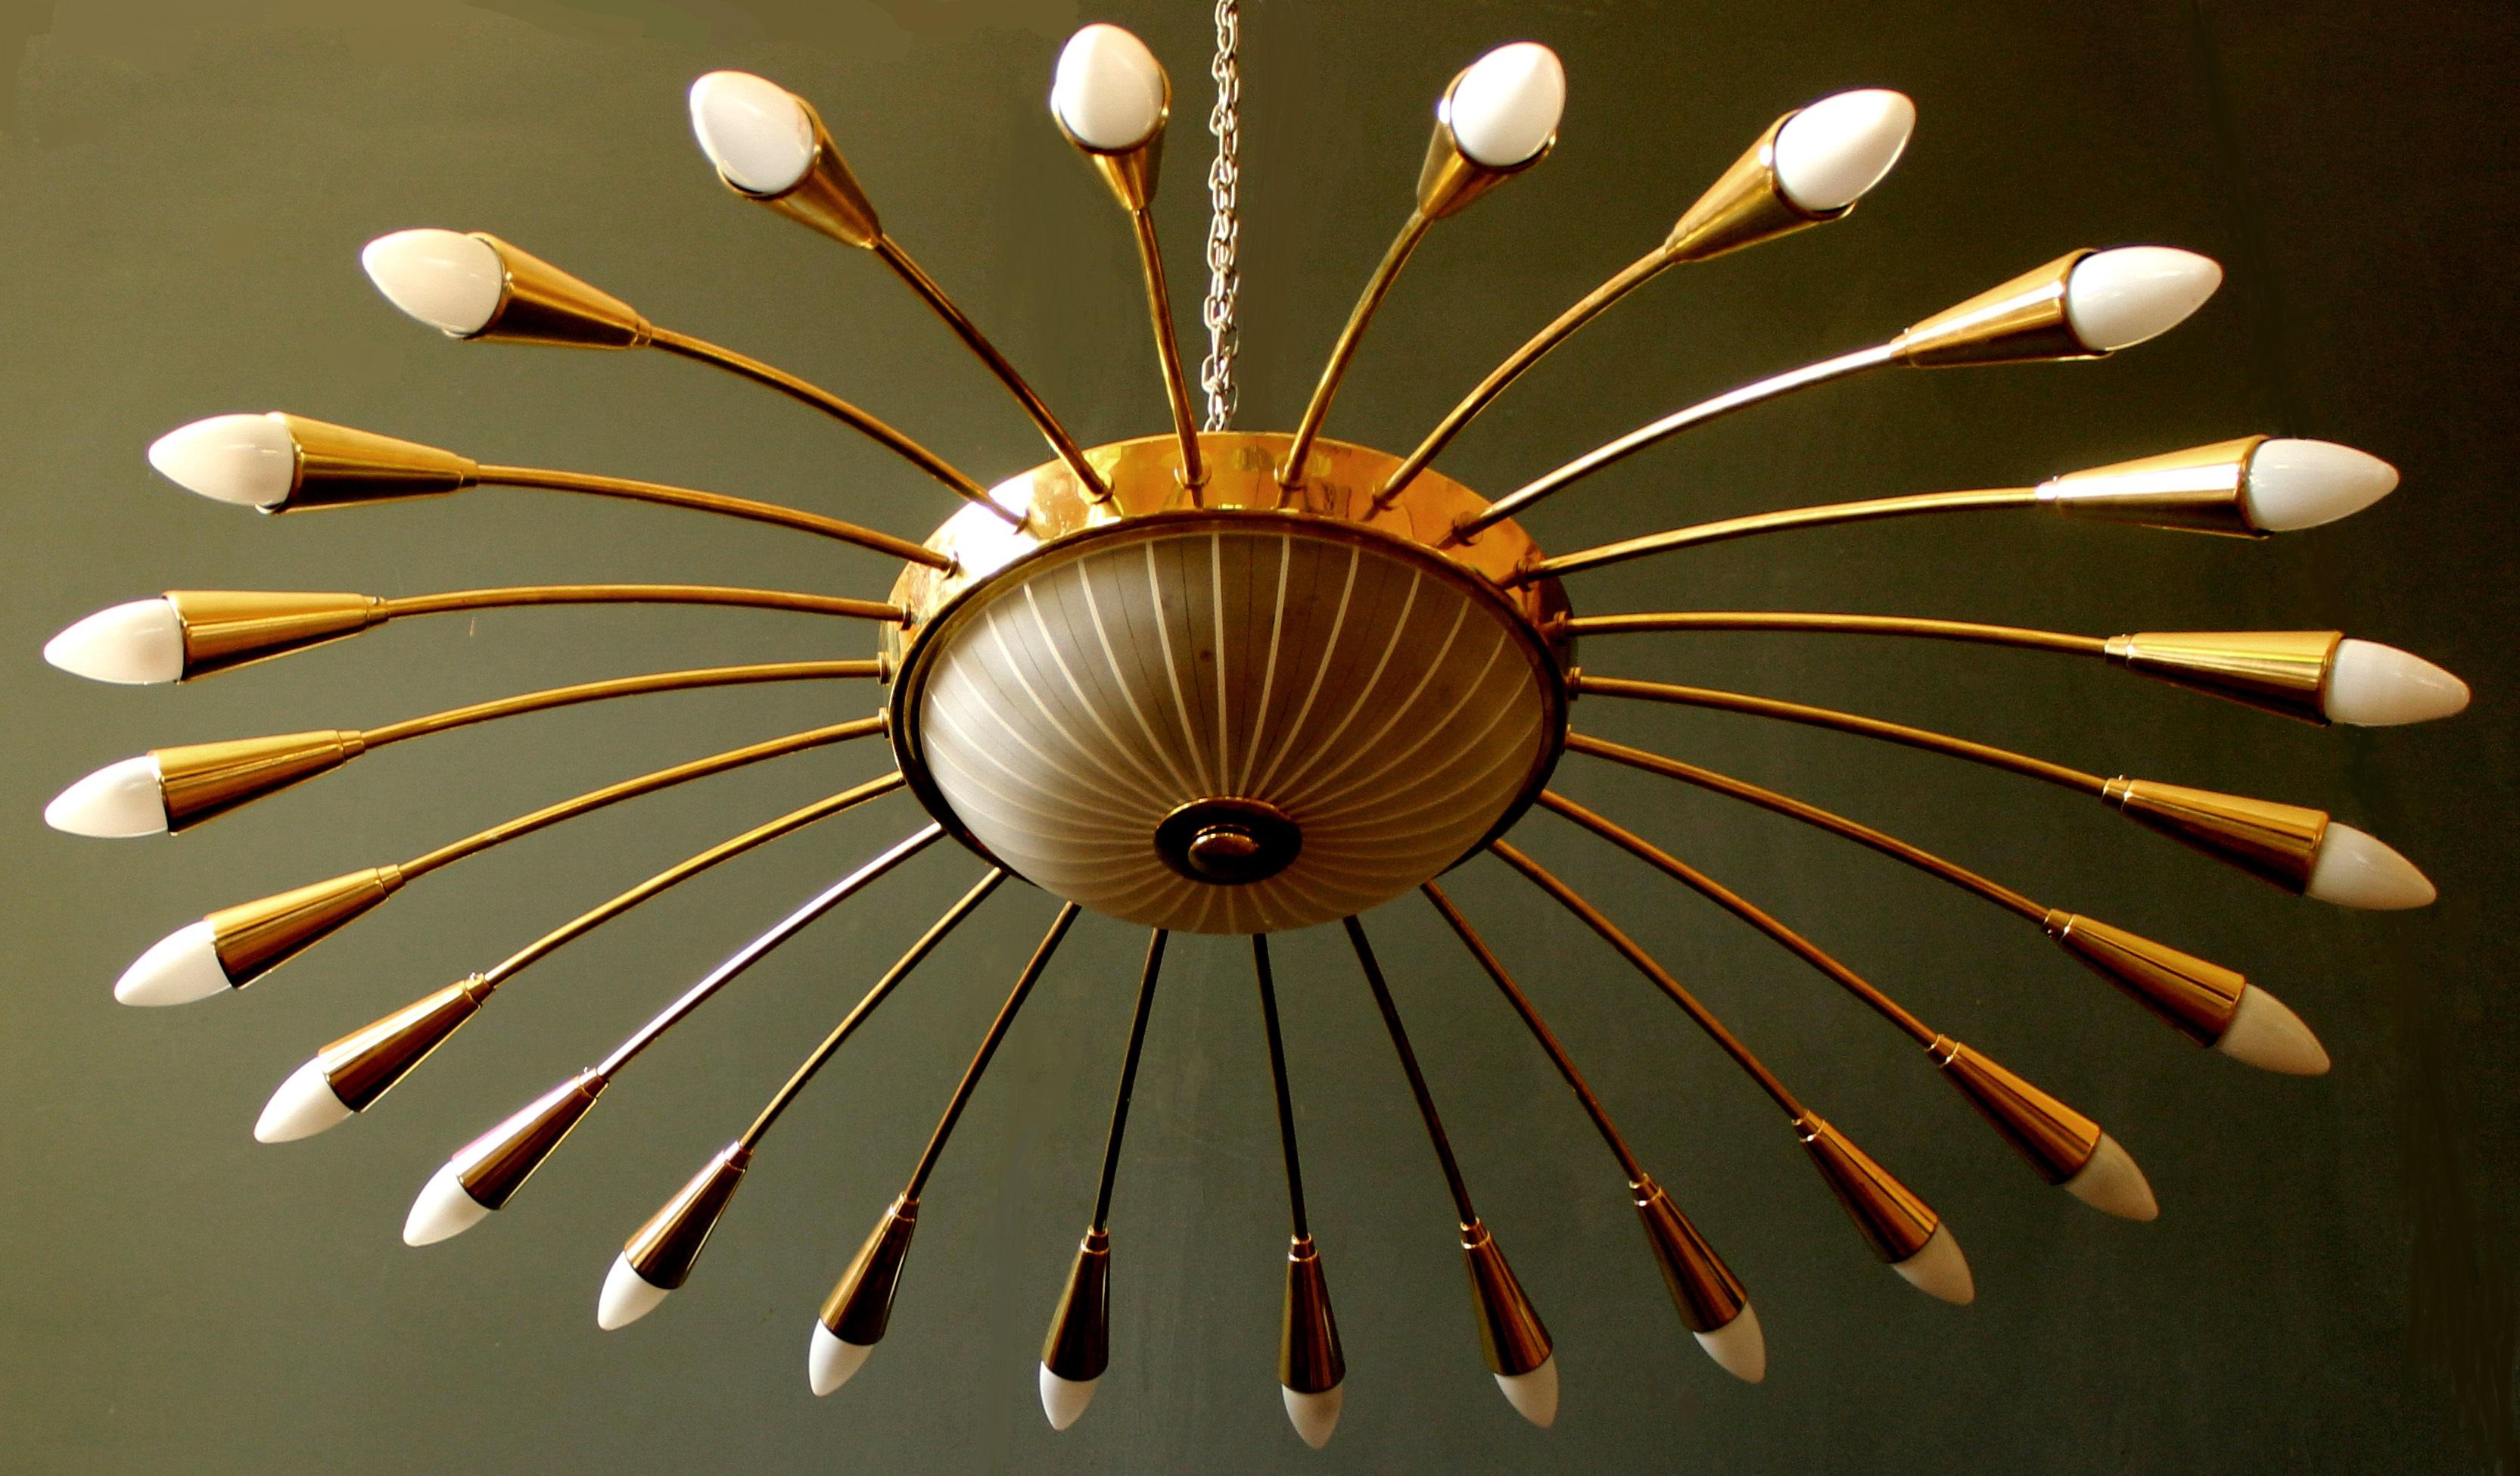 24 arms spider Sputnik chandelier with 26 lights (2 e27 & 24 e14), rewired
Measures: Diameter 3.7 feet, depth 6 inches

The chandelier is in excellent condition, carefully cleaned, rewired and screws for the cups are replaced. The brass surfaces